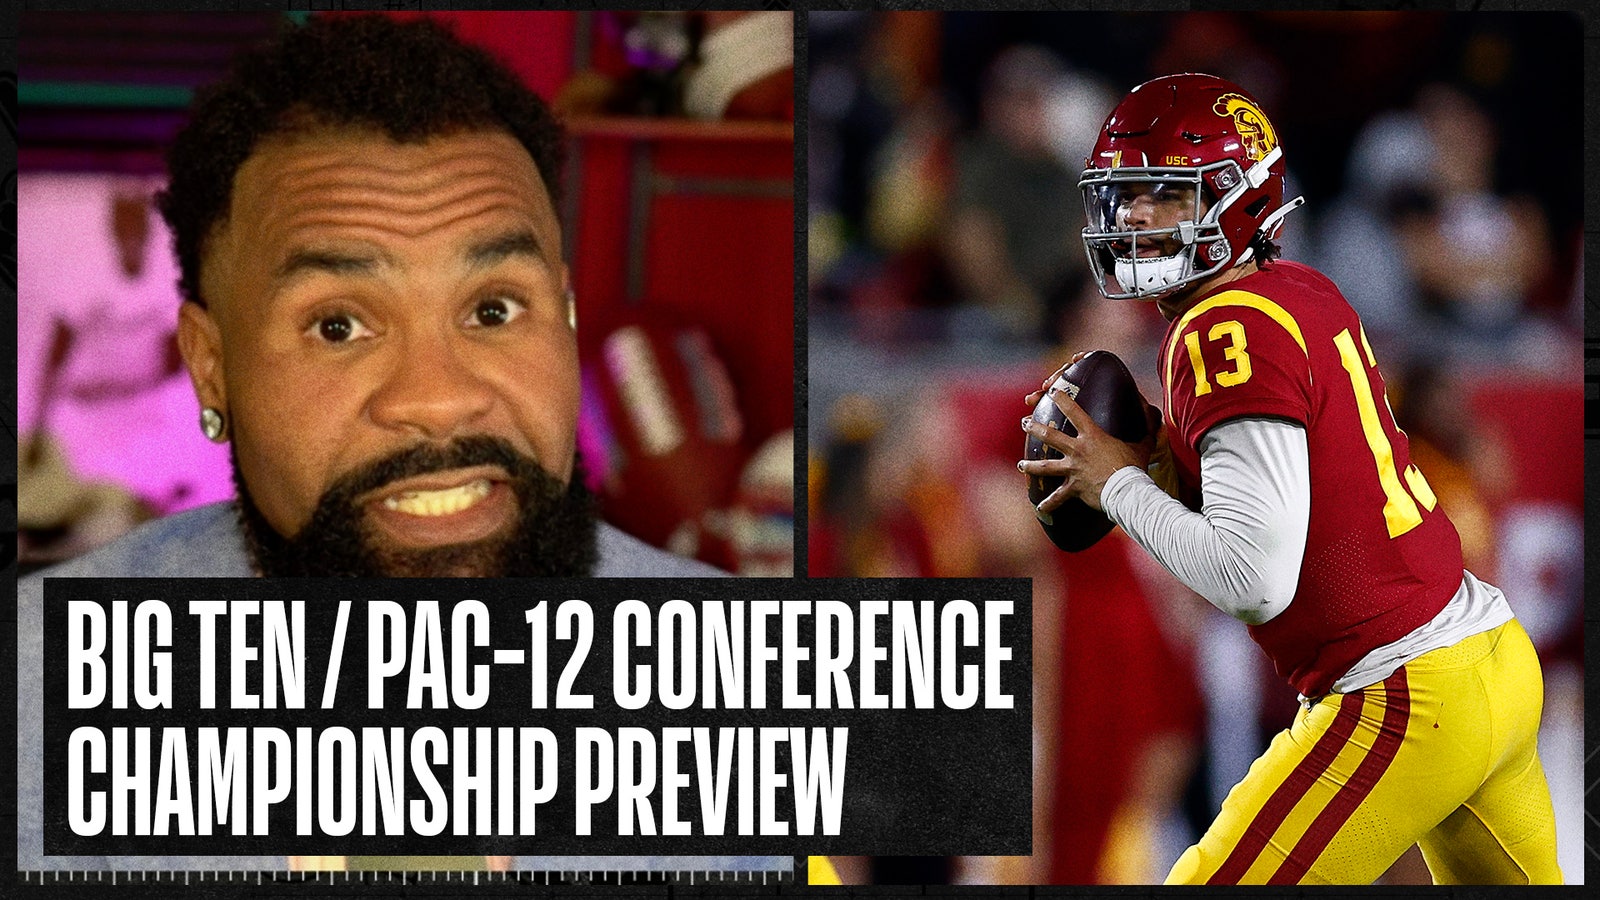 Pac-12 Championship preview